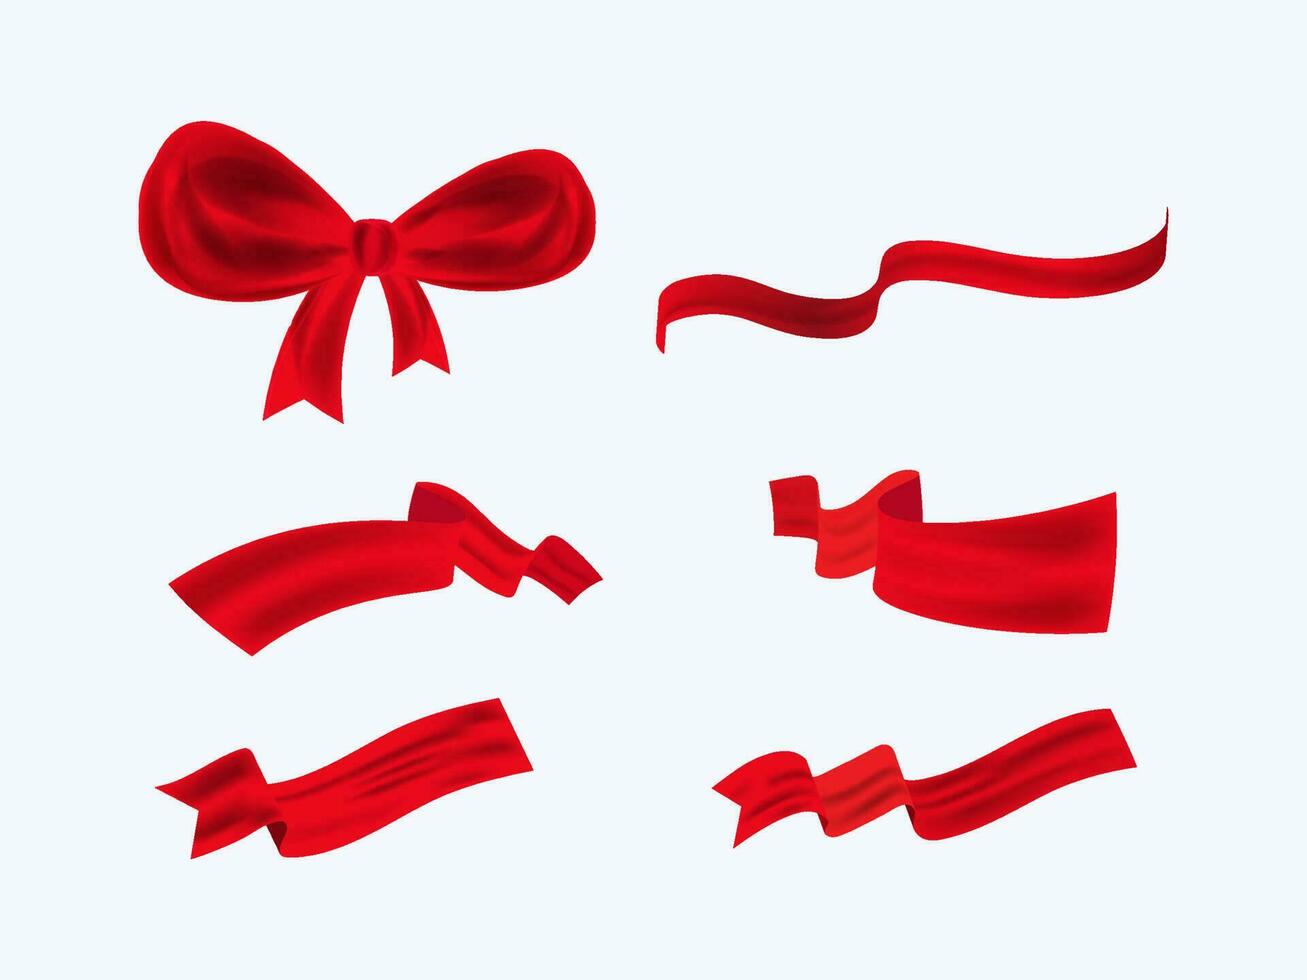 Empty Red Ribbons In Different Style On White Background. vector